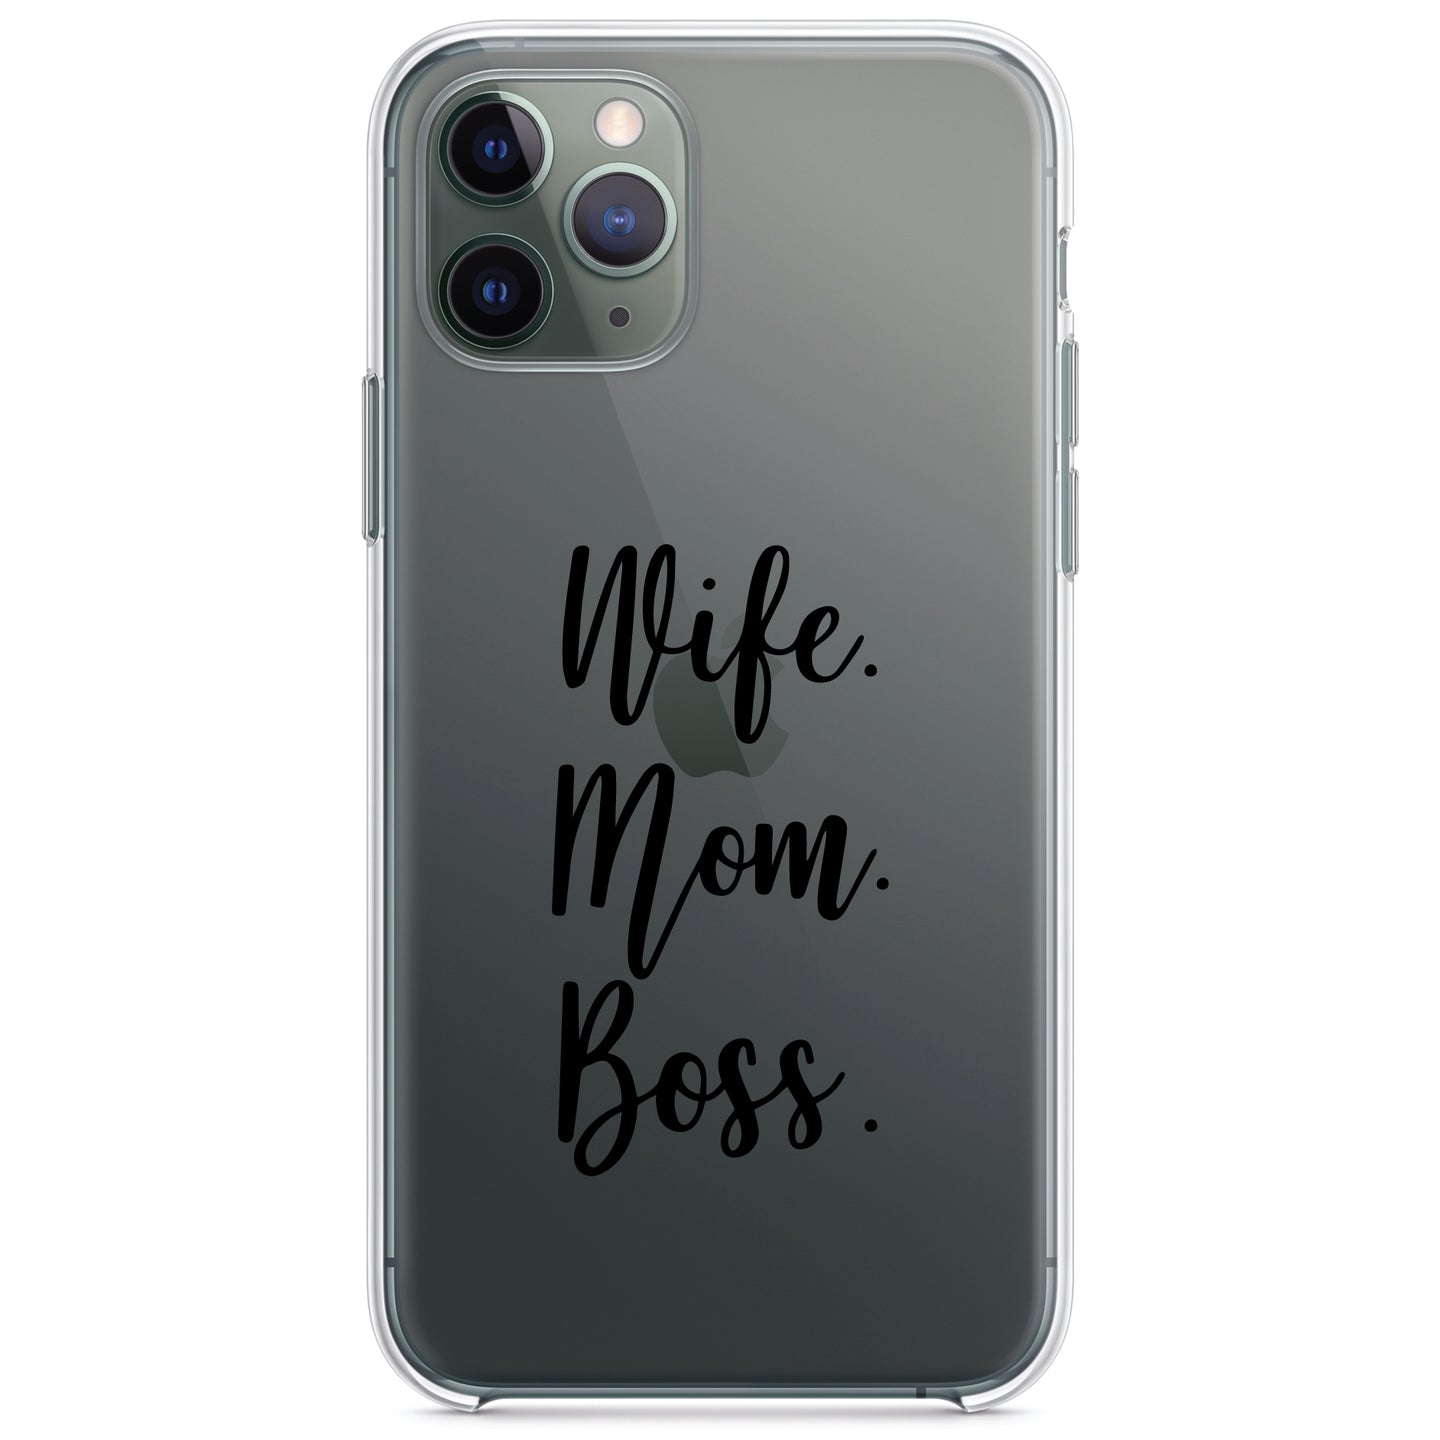 DistinctInk® Clear Shockproof Hybrid Case for Apple iPhone / Samsung Galaxy / Google Pixel - Wife. Mom. Boss.